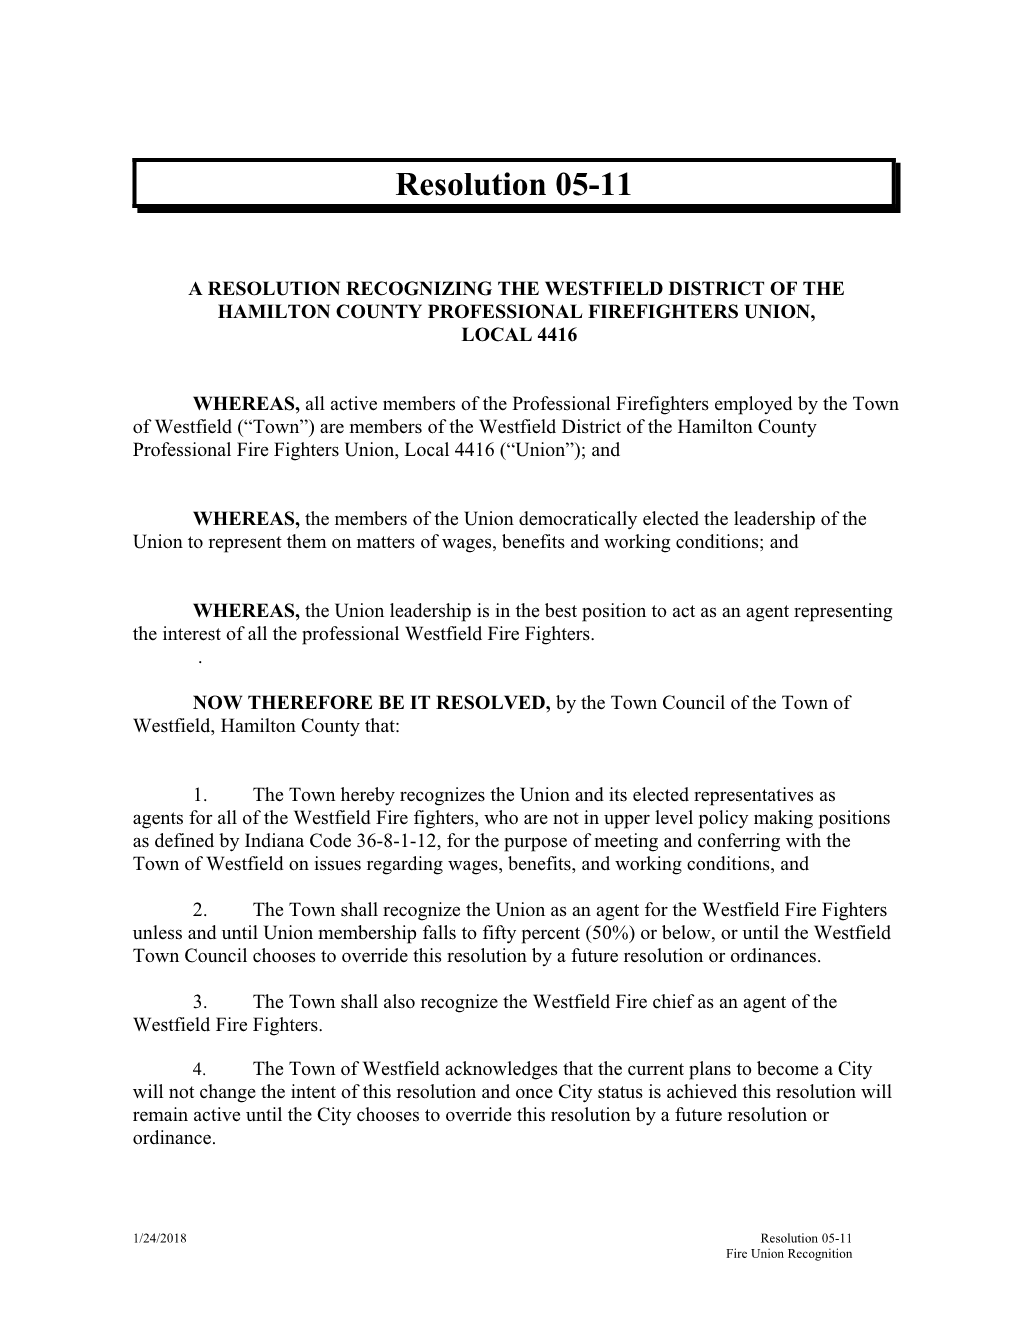 A Resolution Recognizing the Westfield District of the Hamilton County Professional